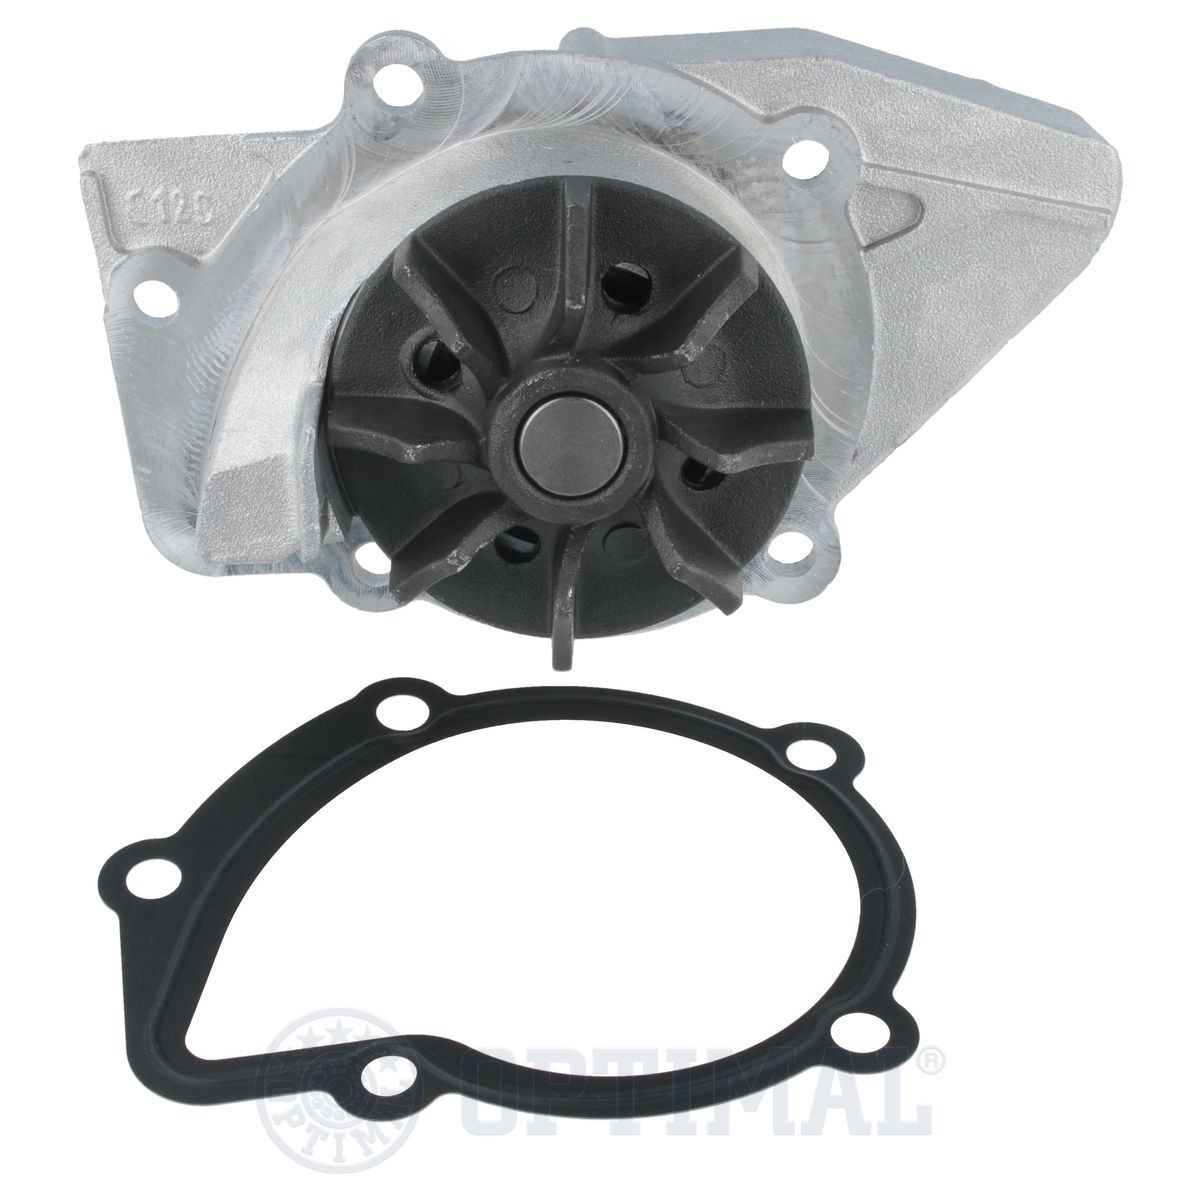 OPTIMAL Water pump for engine AQ-1137